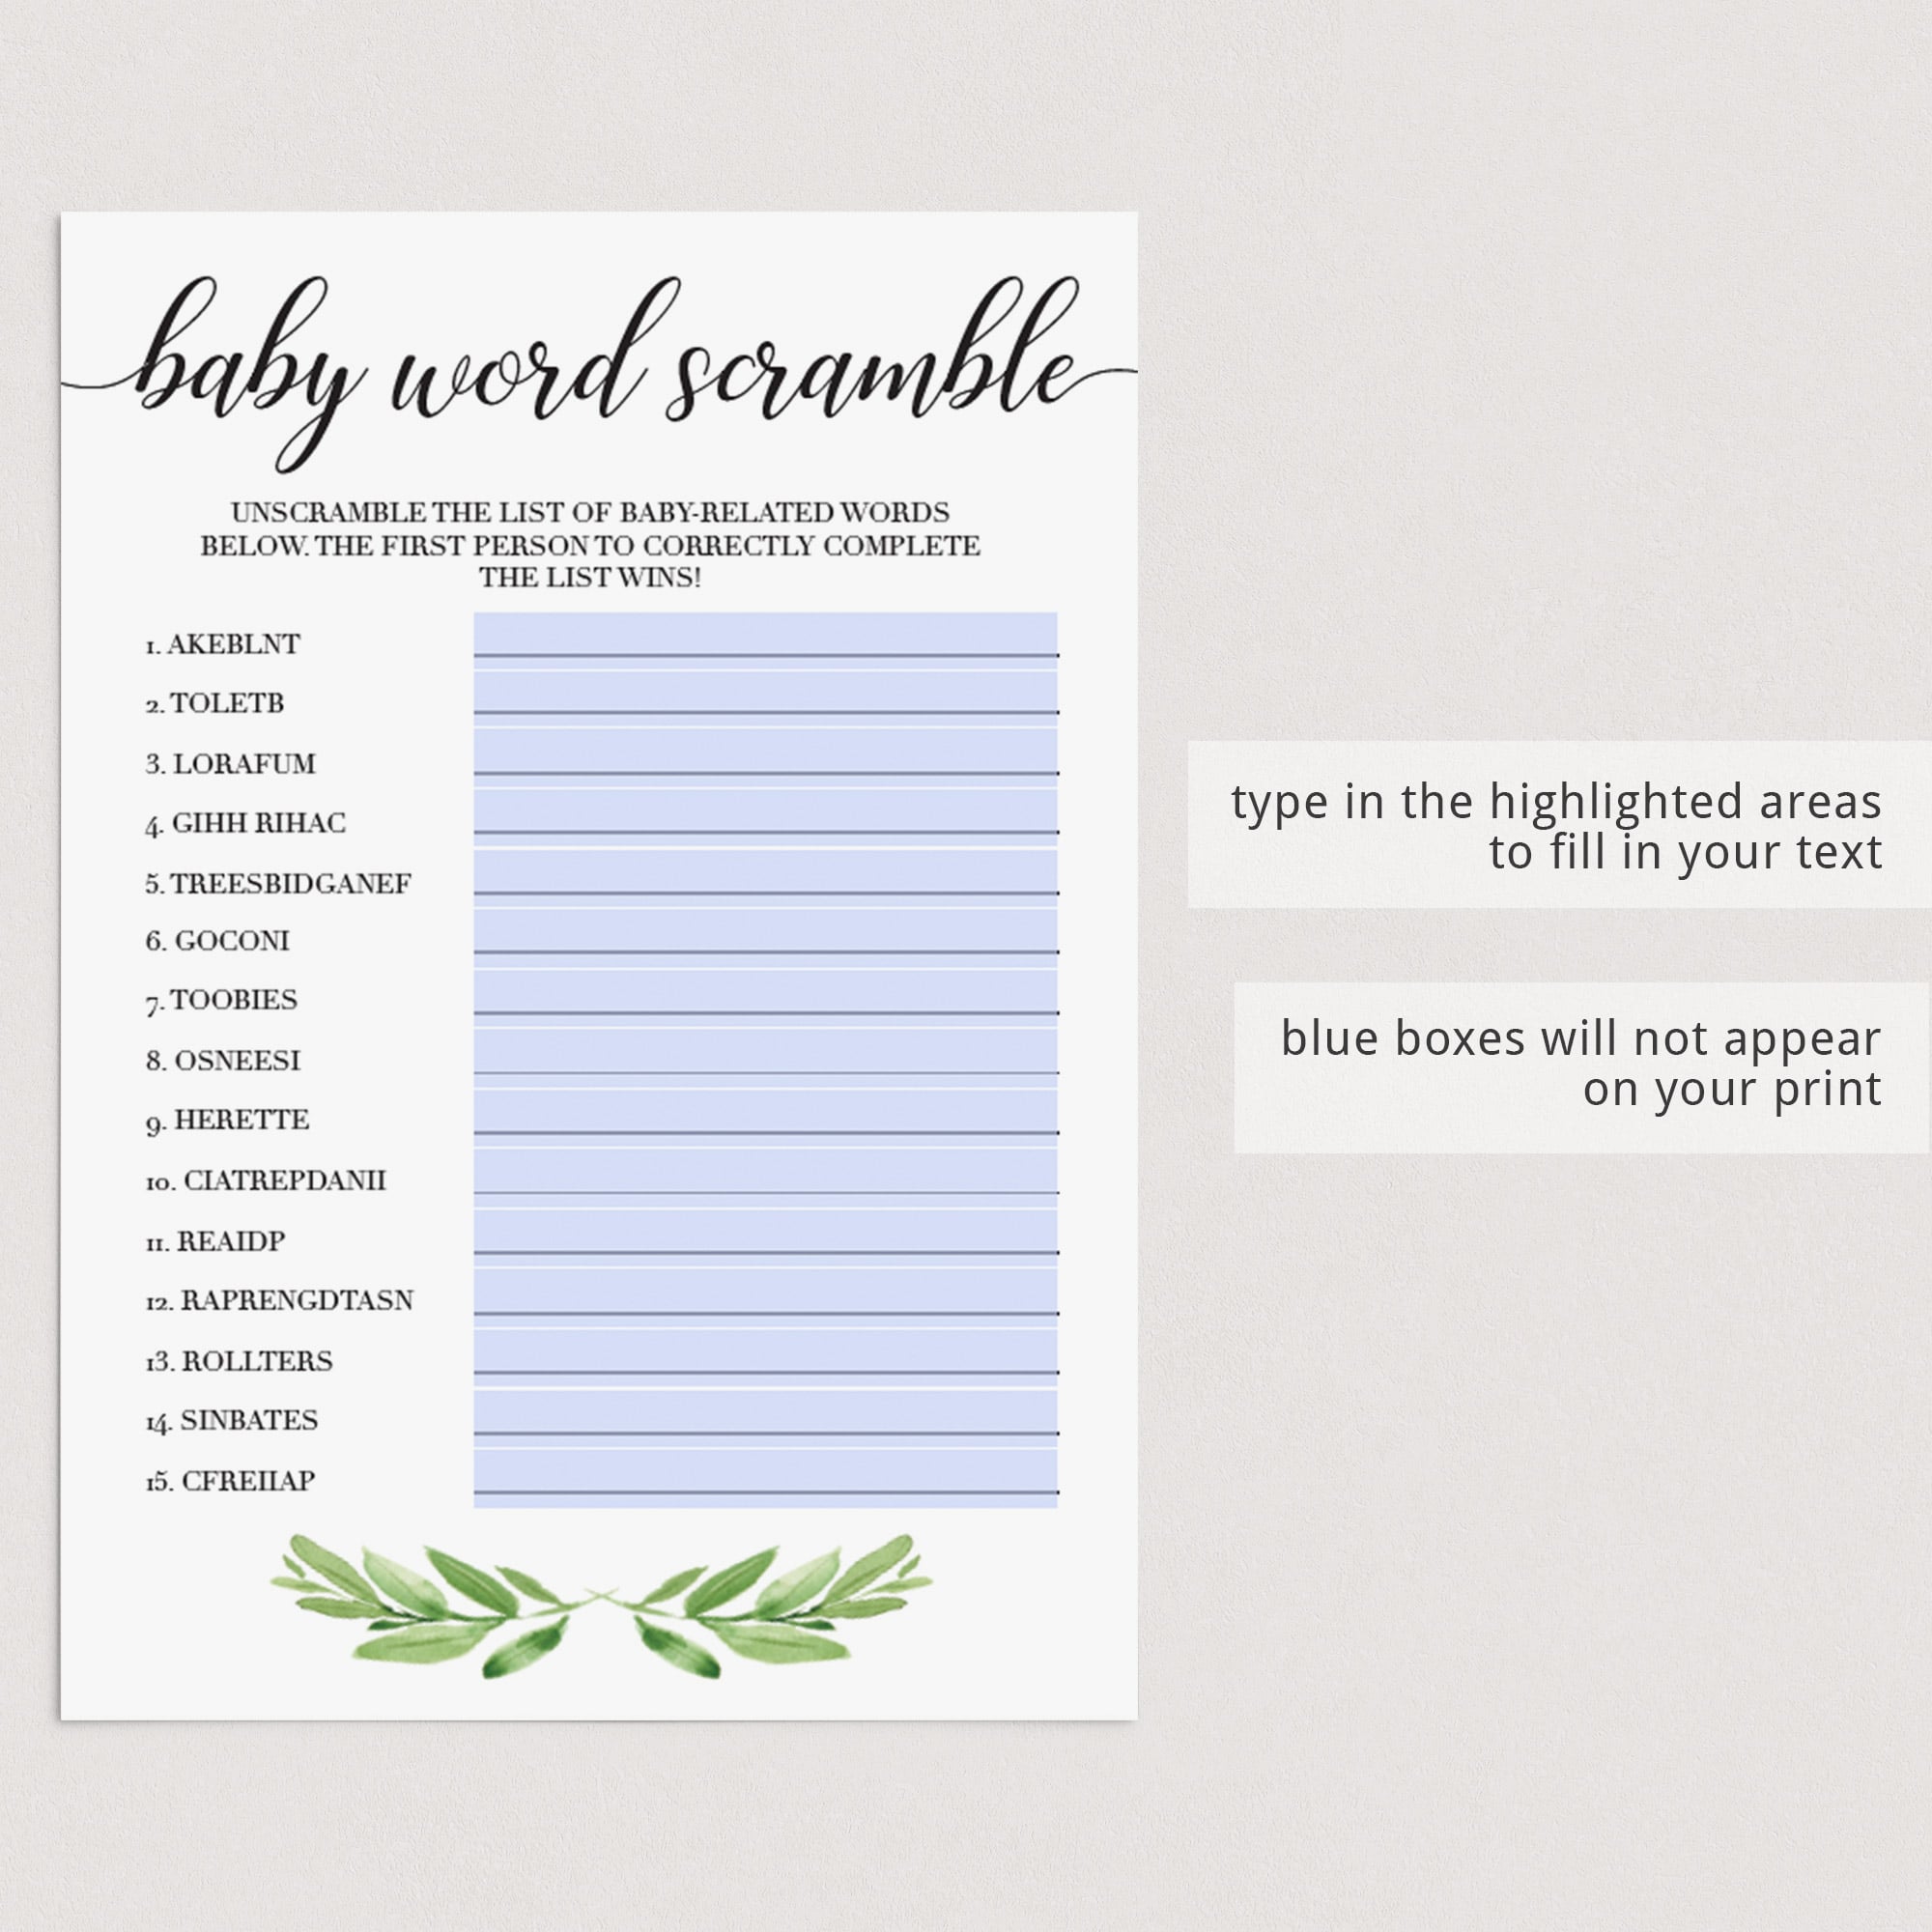 Virtual baby word scramble game download by LittleSizzle